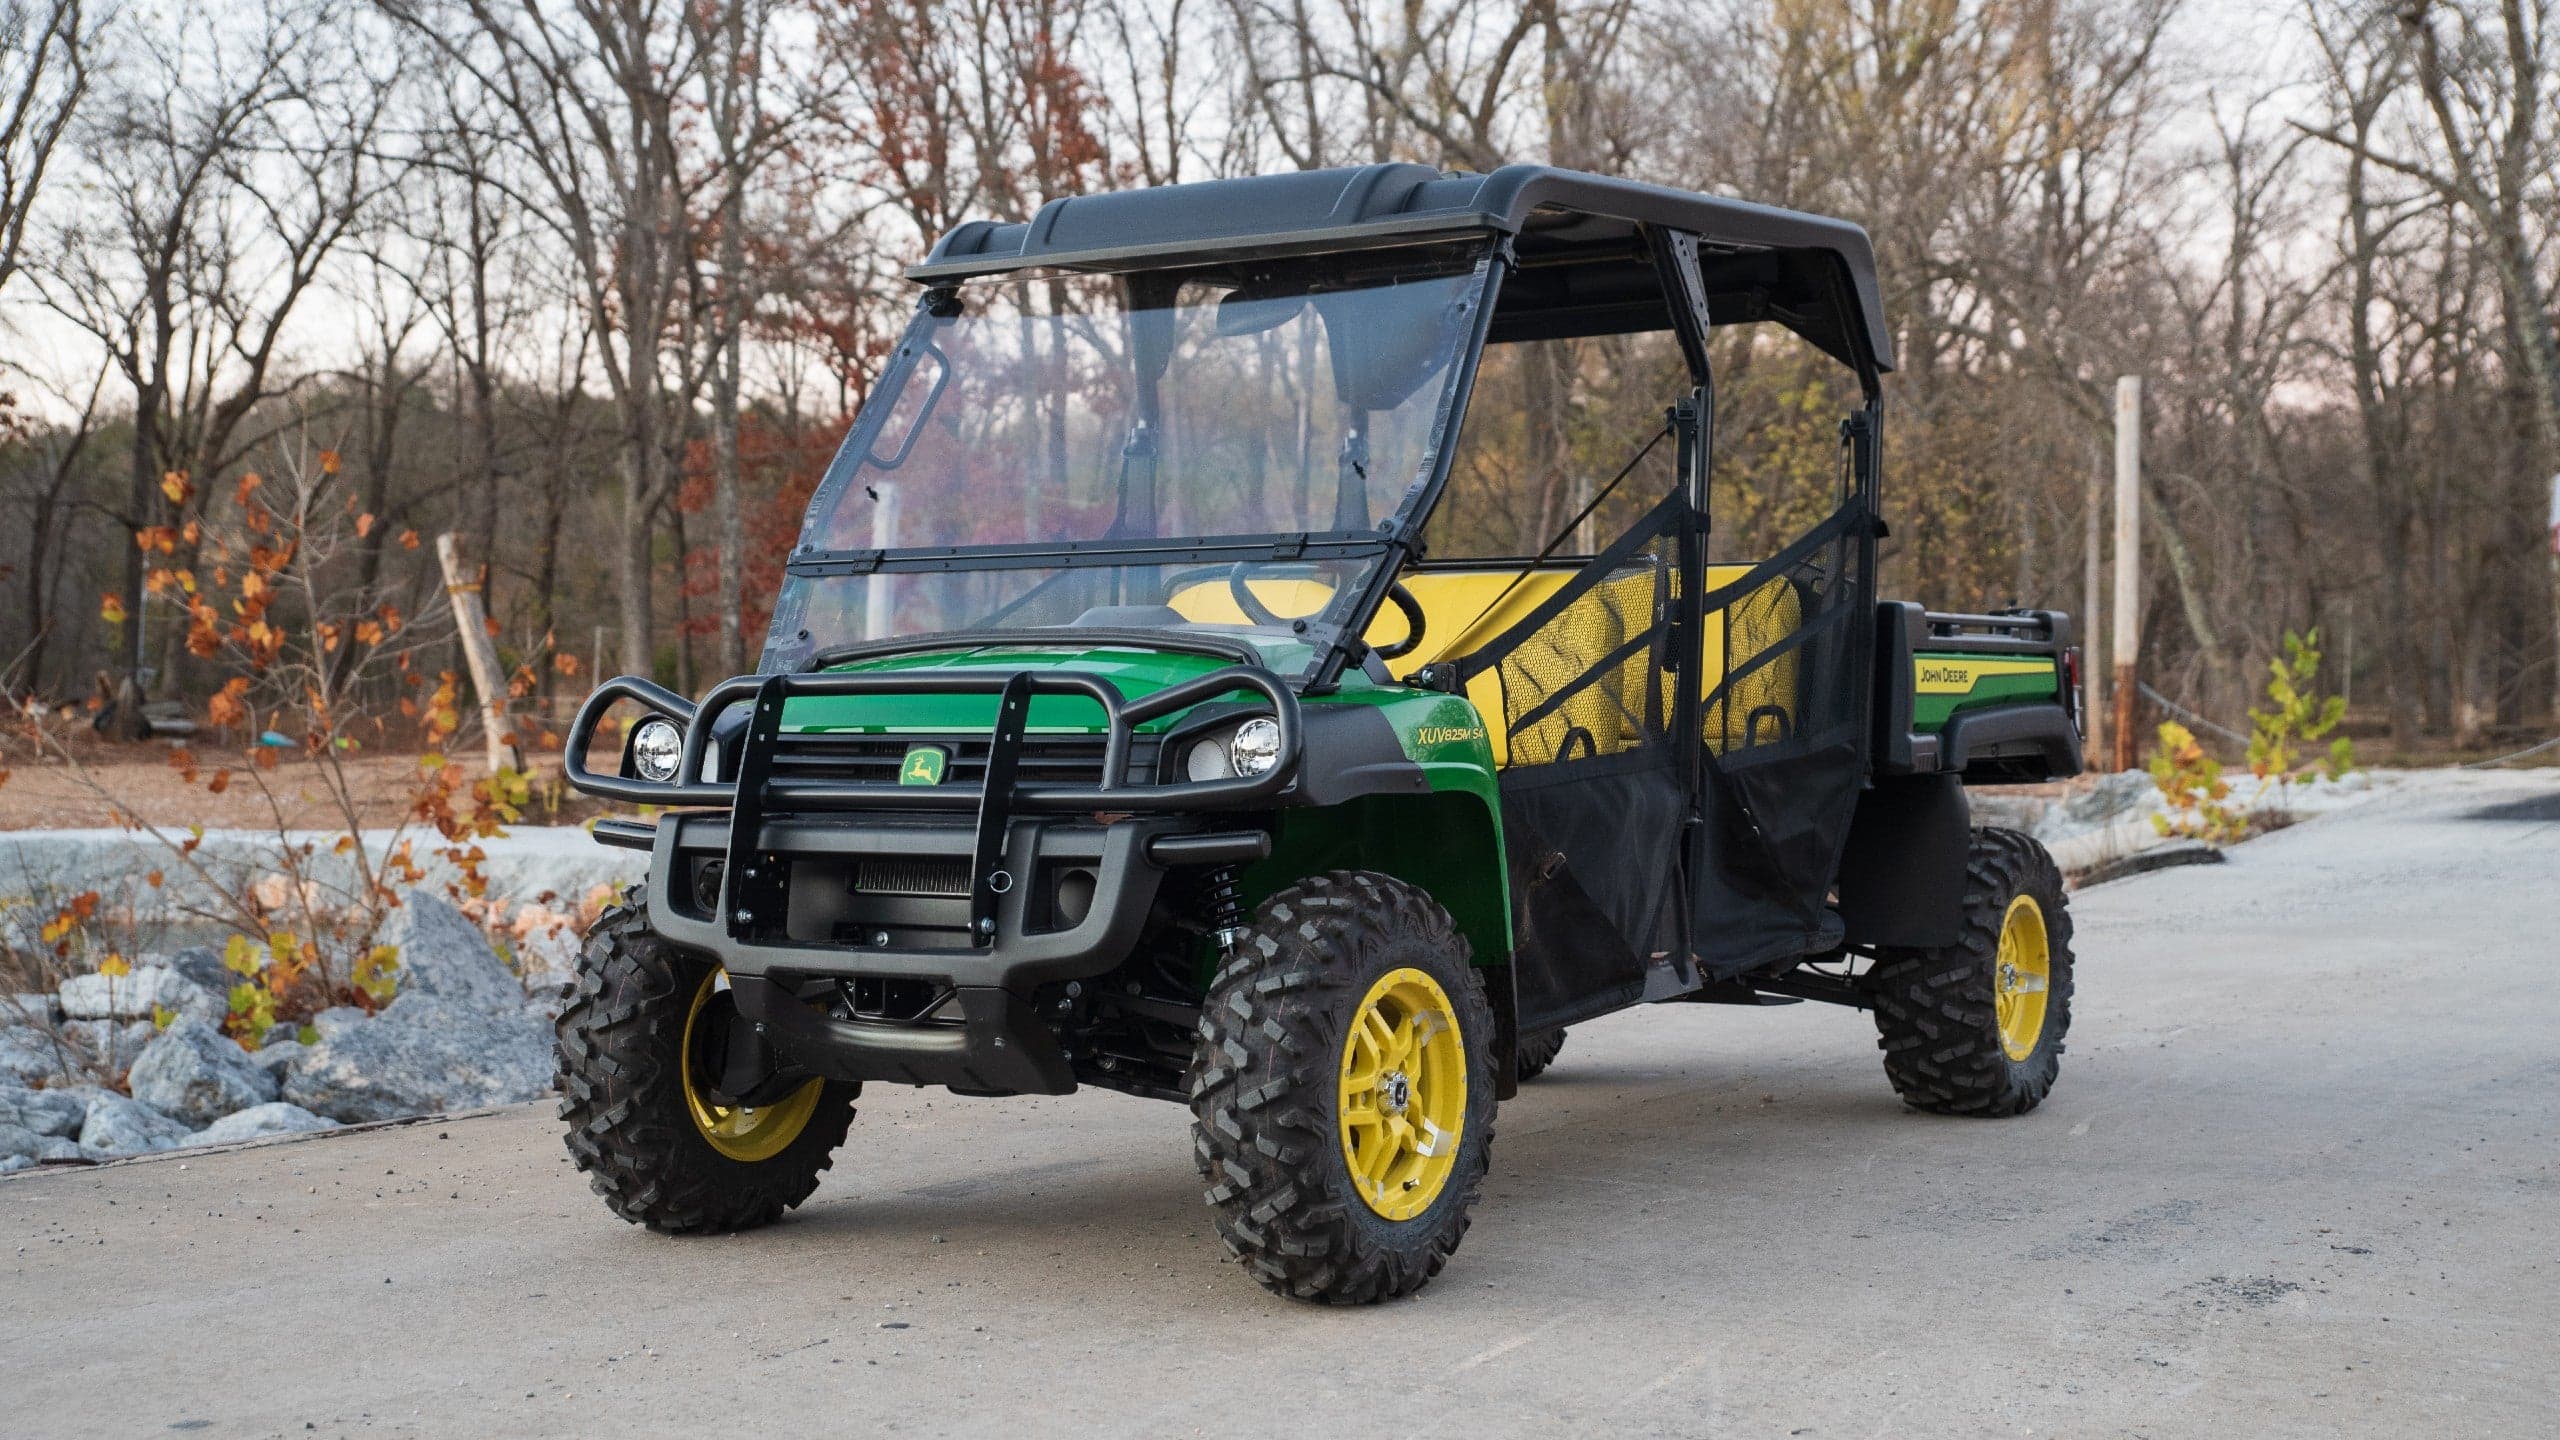 2021 John Deere Gator 825M S4 Review: Everything You Love in a Farm Truck, Only More Expensive